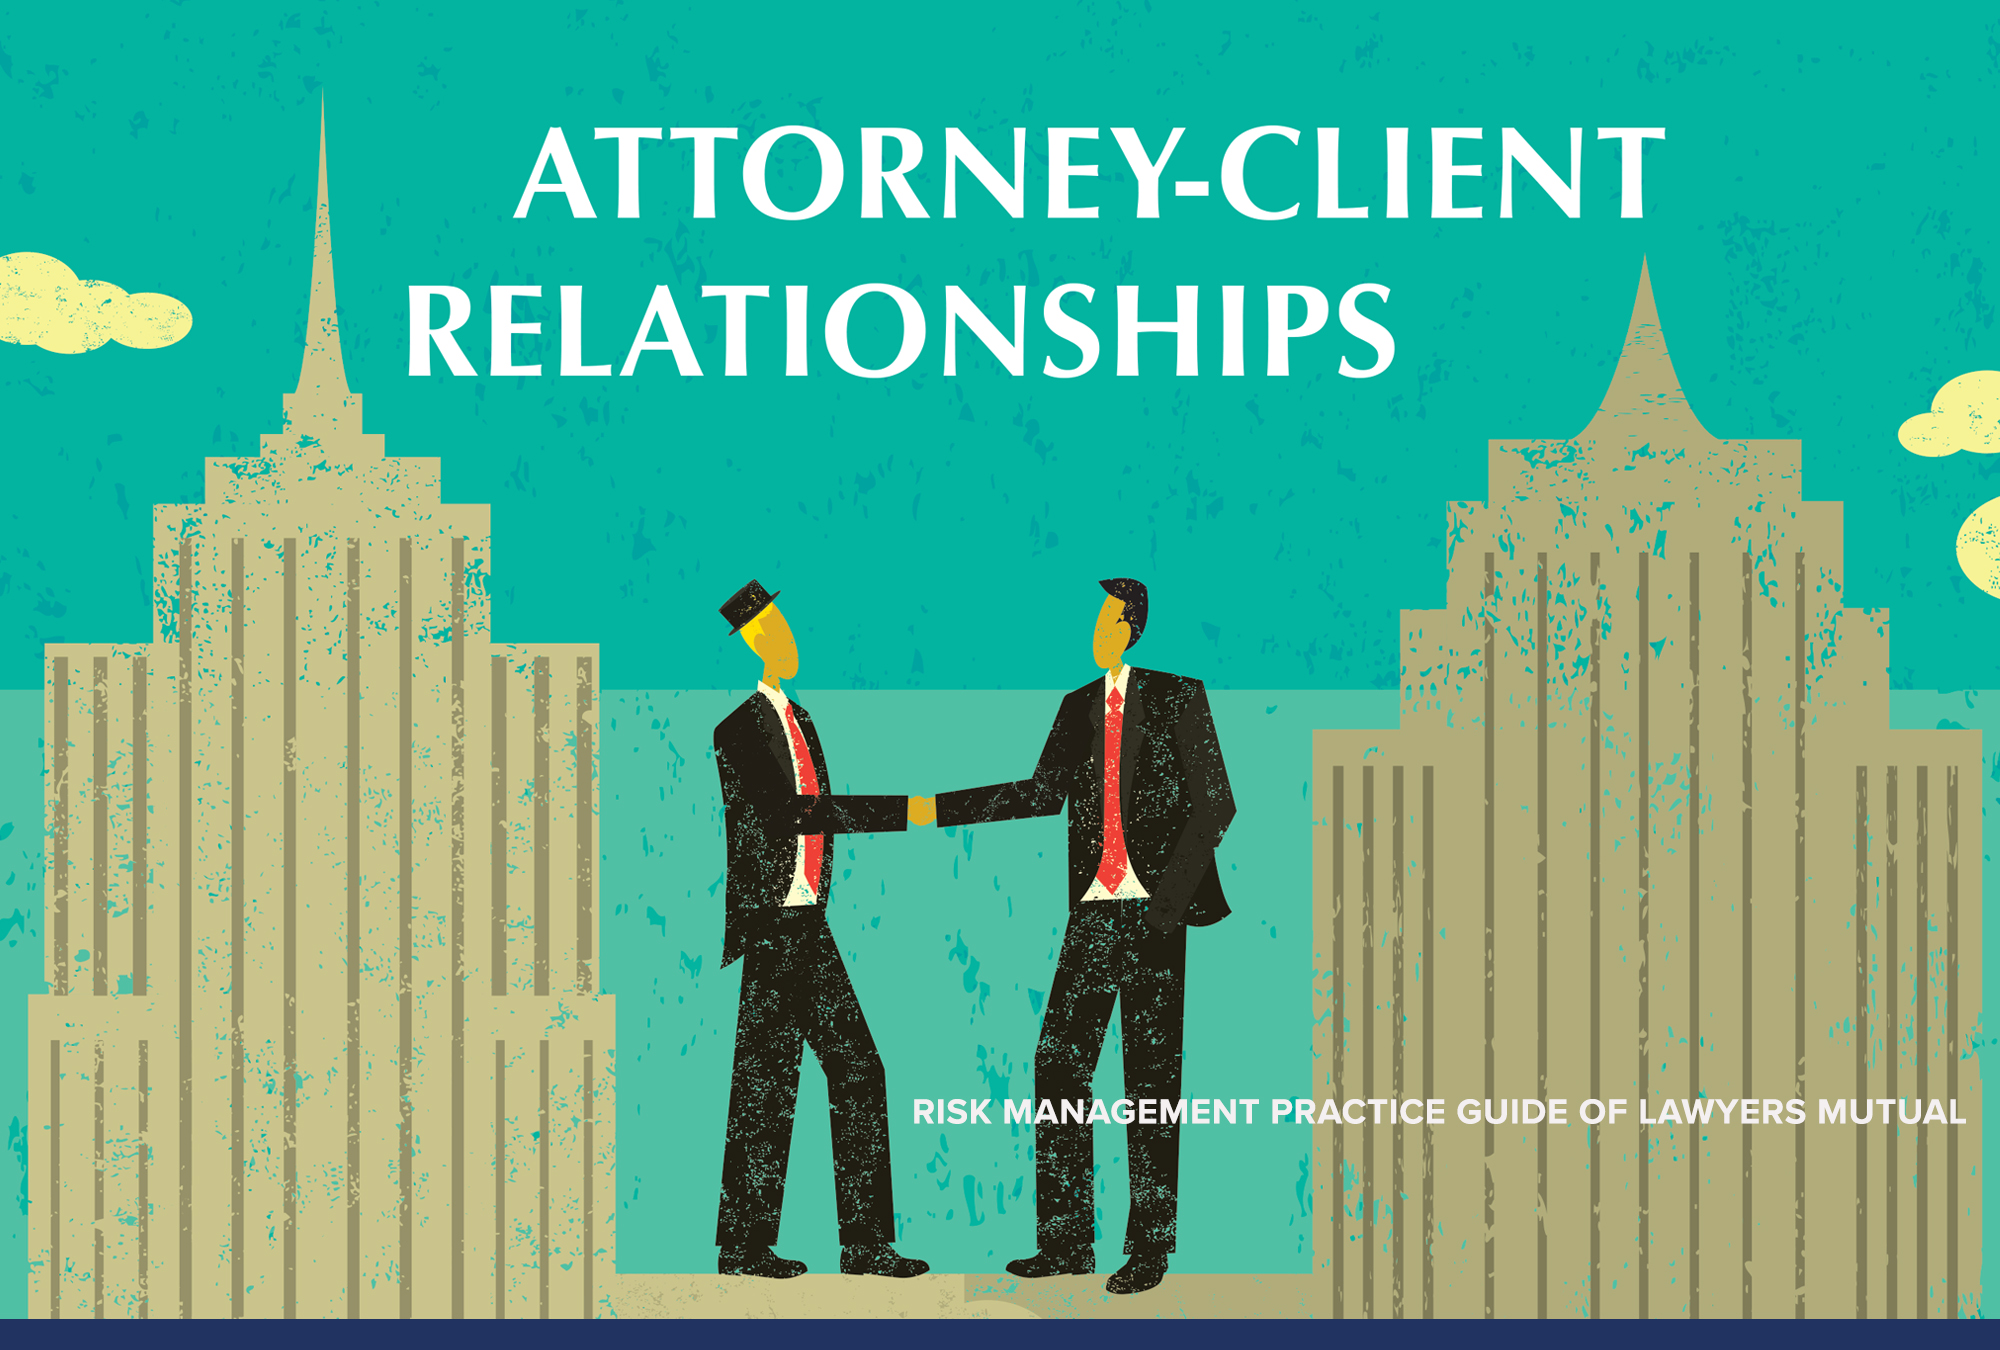 AttorneyClient Relationships LM Practice Guide Lawyers Mutual